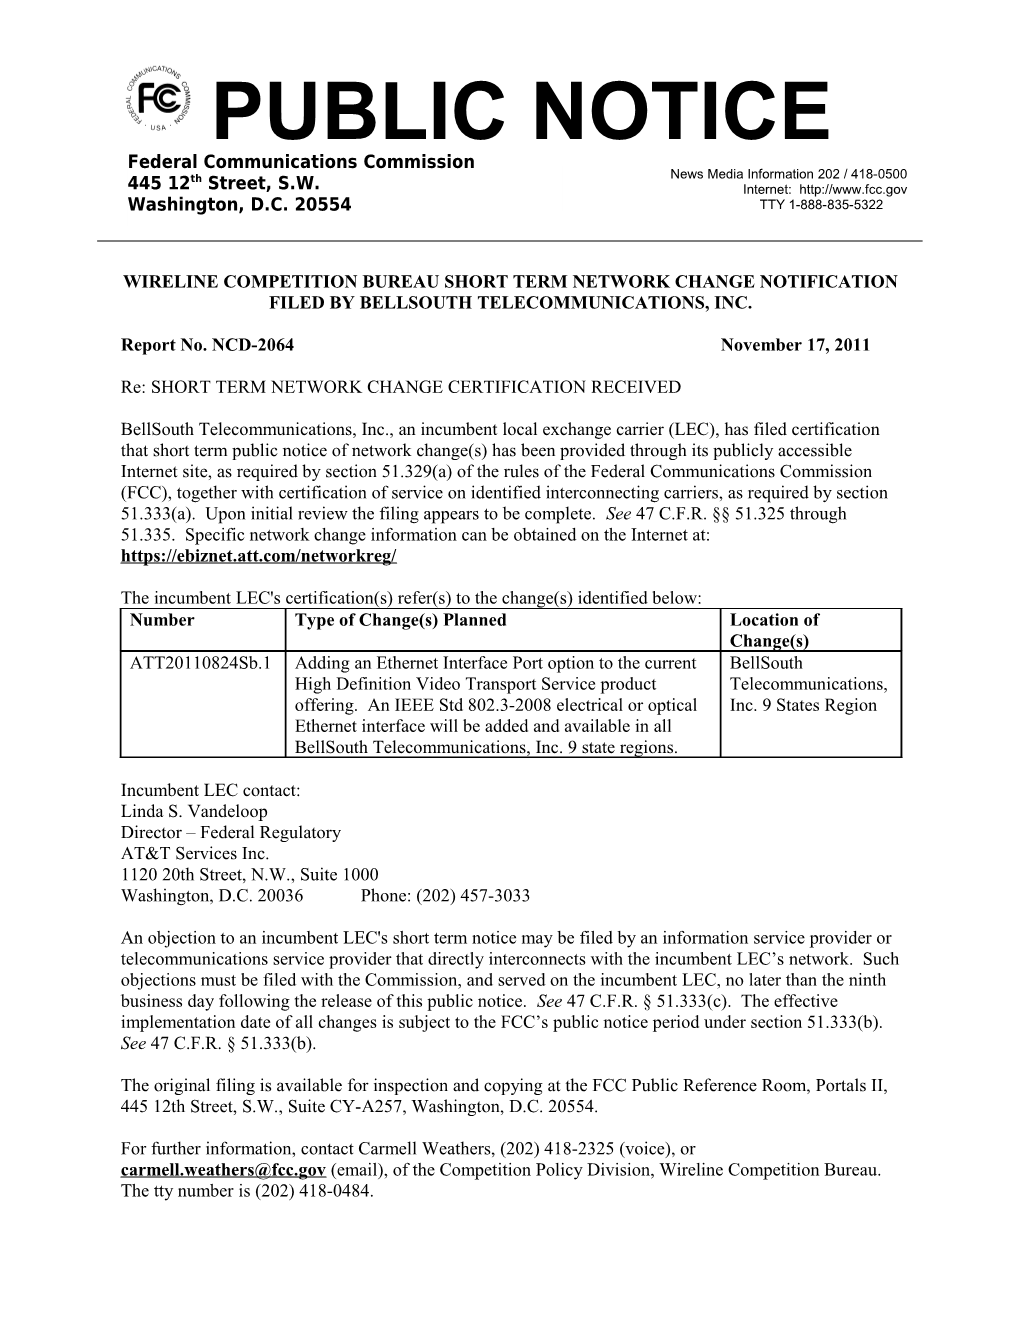 Wireline Competition Bureau Short Term Network Change Notification Filed by Bellsouth